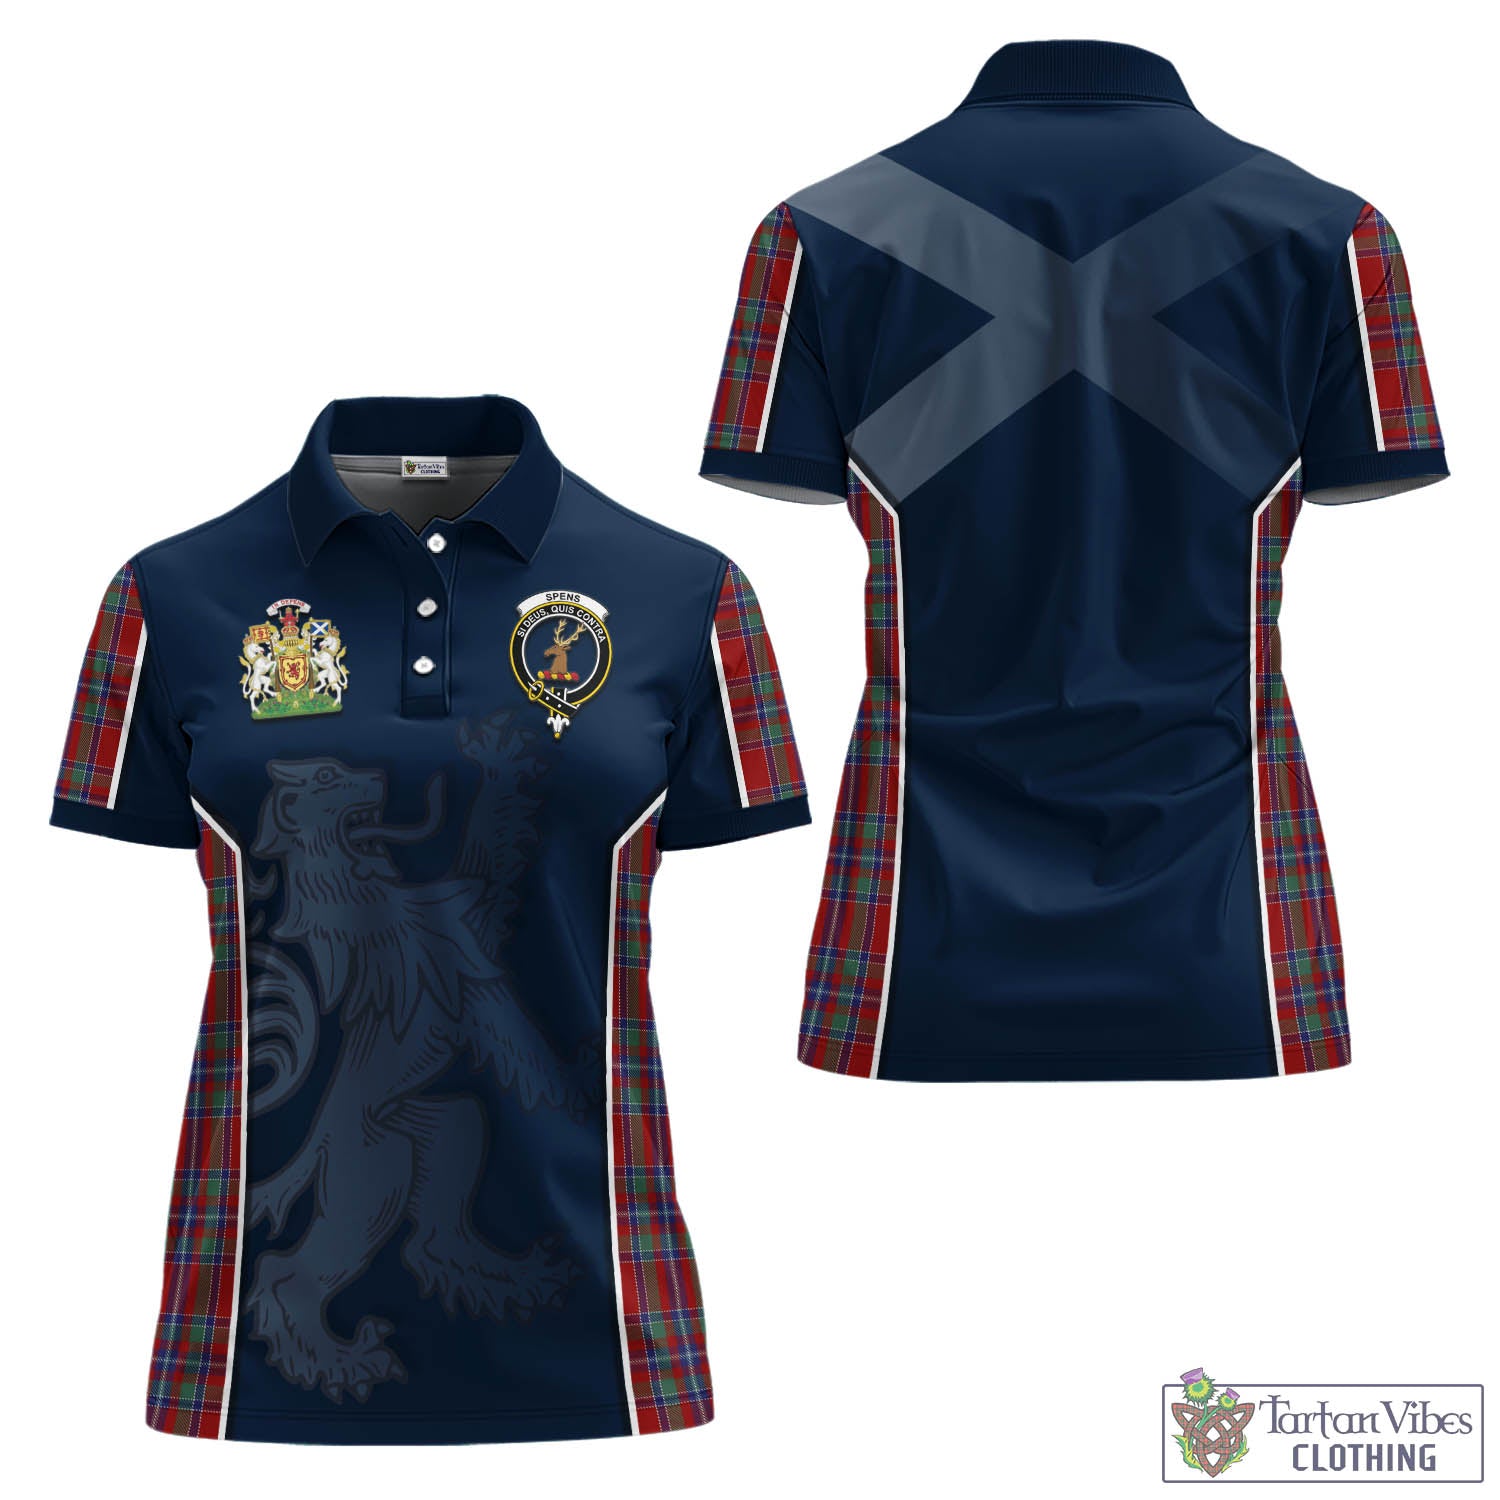 Tartan Vibes Clothing Spens Tartan Women's Polo Shirt with Family Crest and Lion Rampant Vibes Sport Style